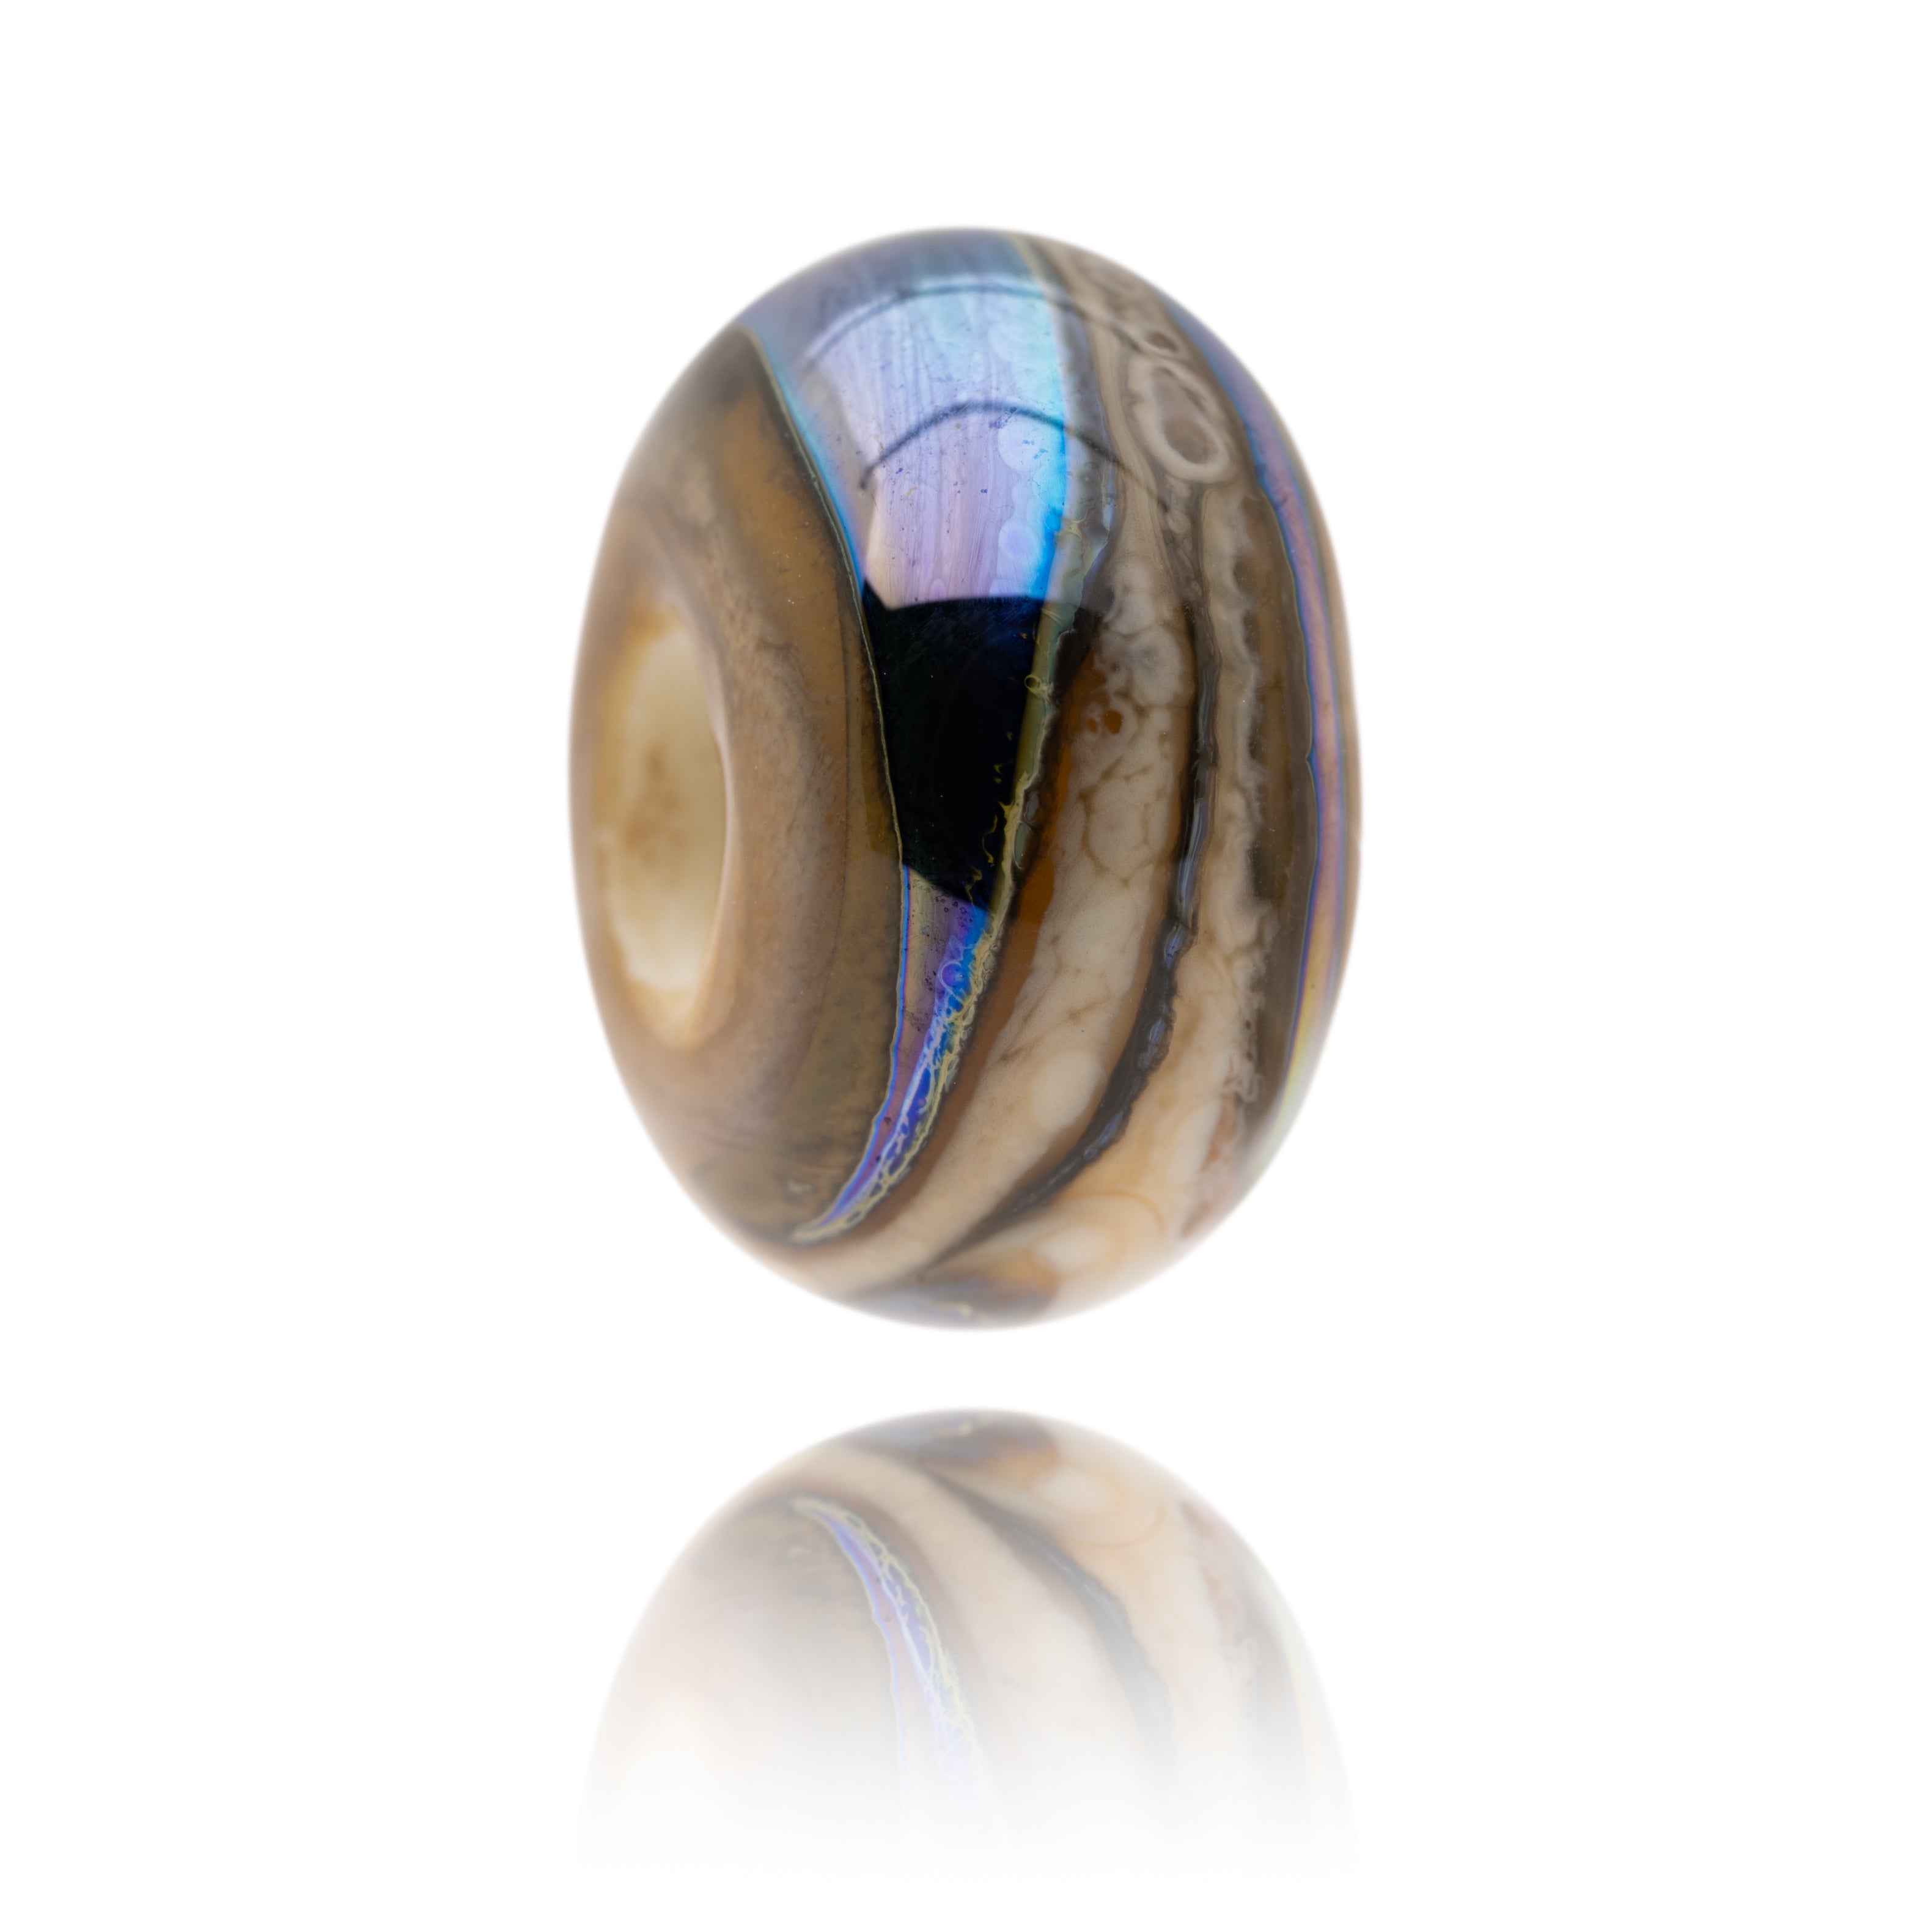 Ivory and blue swirling glass bead representing Longsands Beach in Tynemouth.